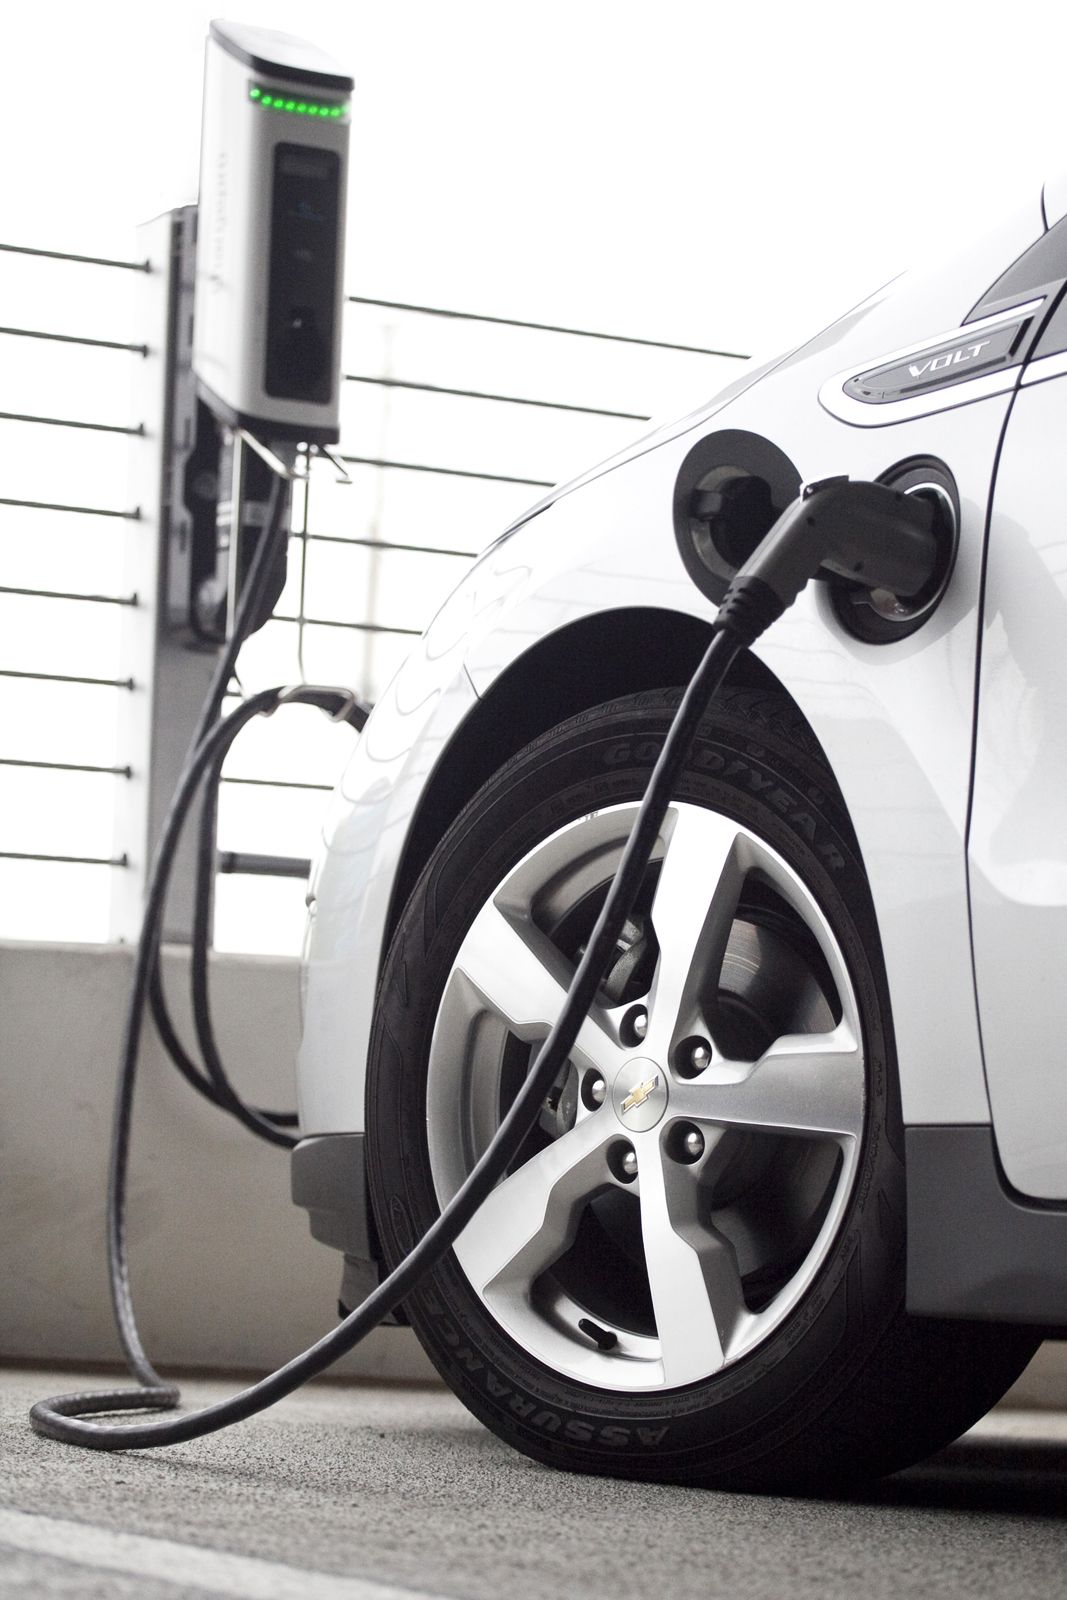 Heartland Charging Services partnered with Semaconnect, EV charger in action